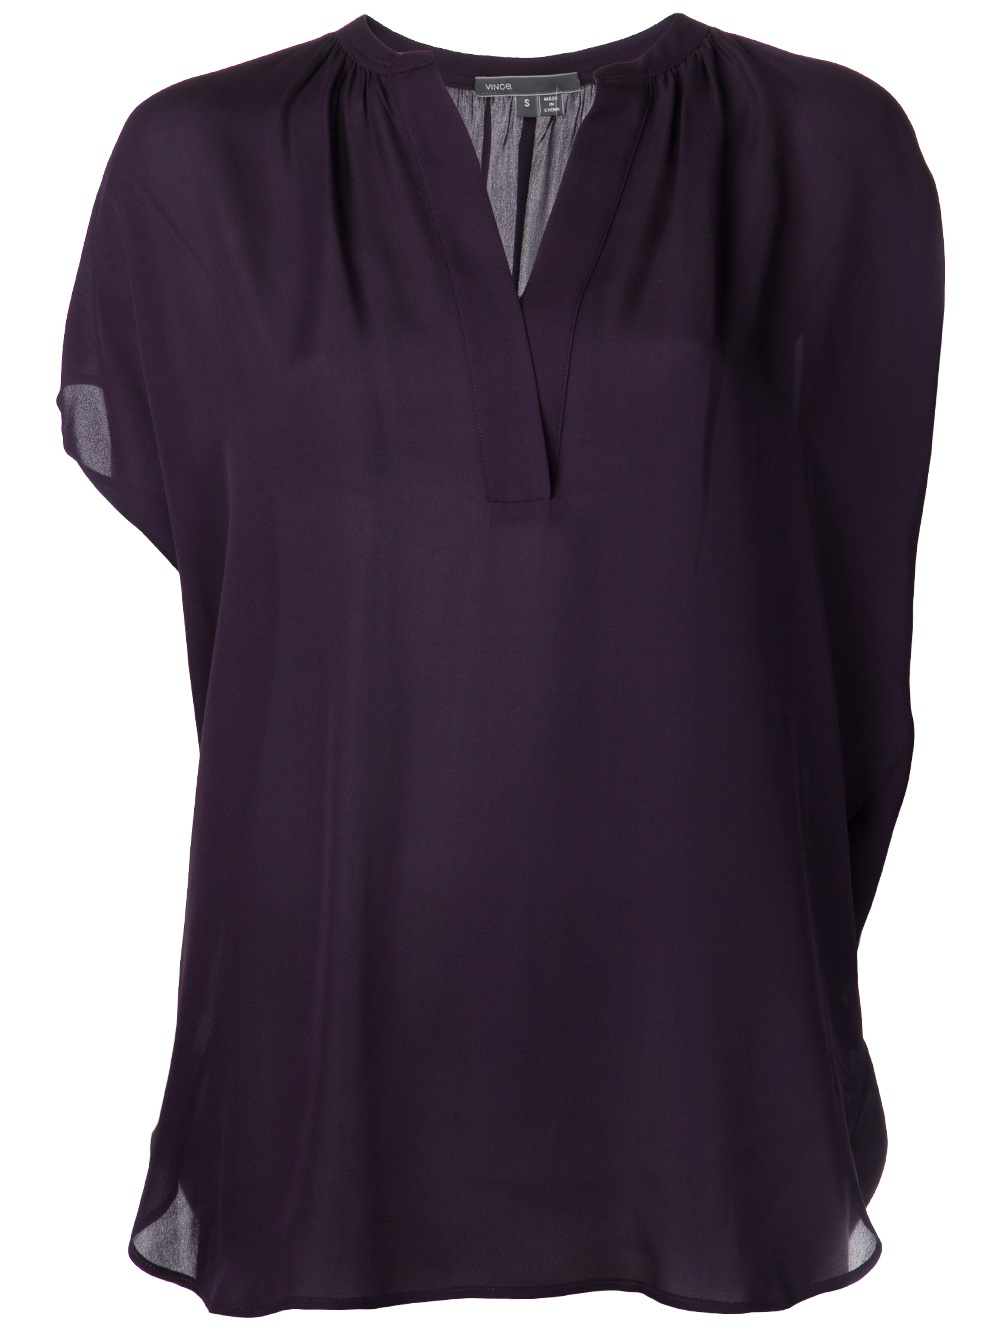 Lyst - Vince Popover Blouse in Purple